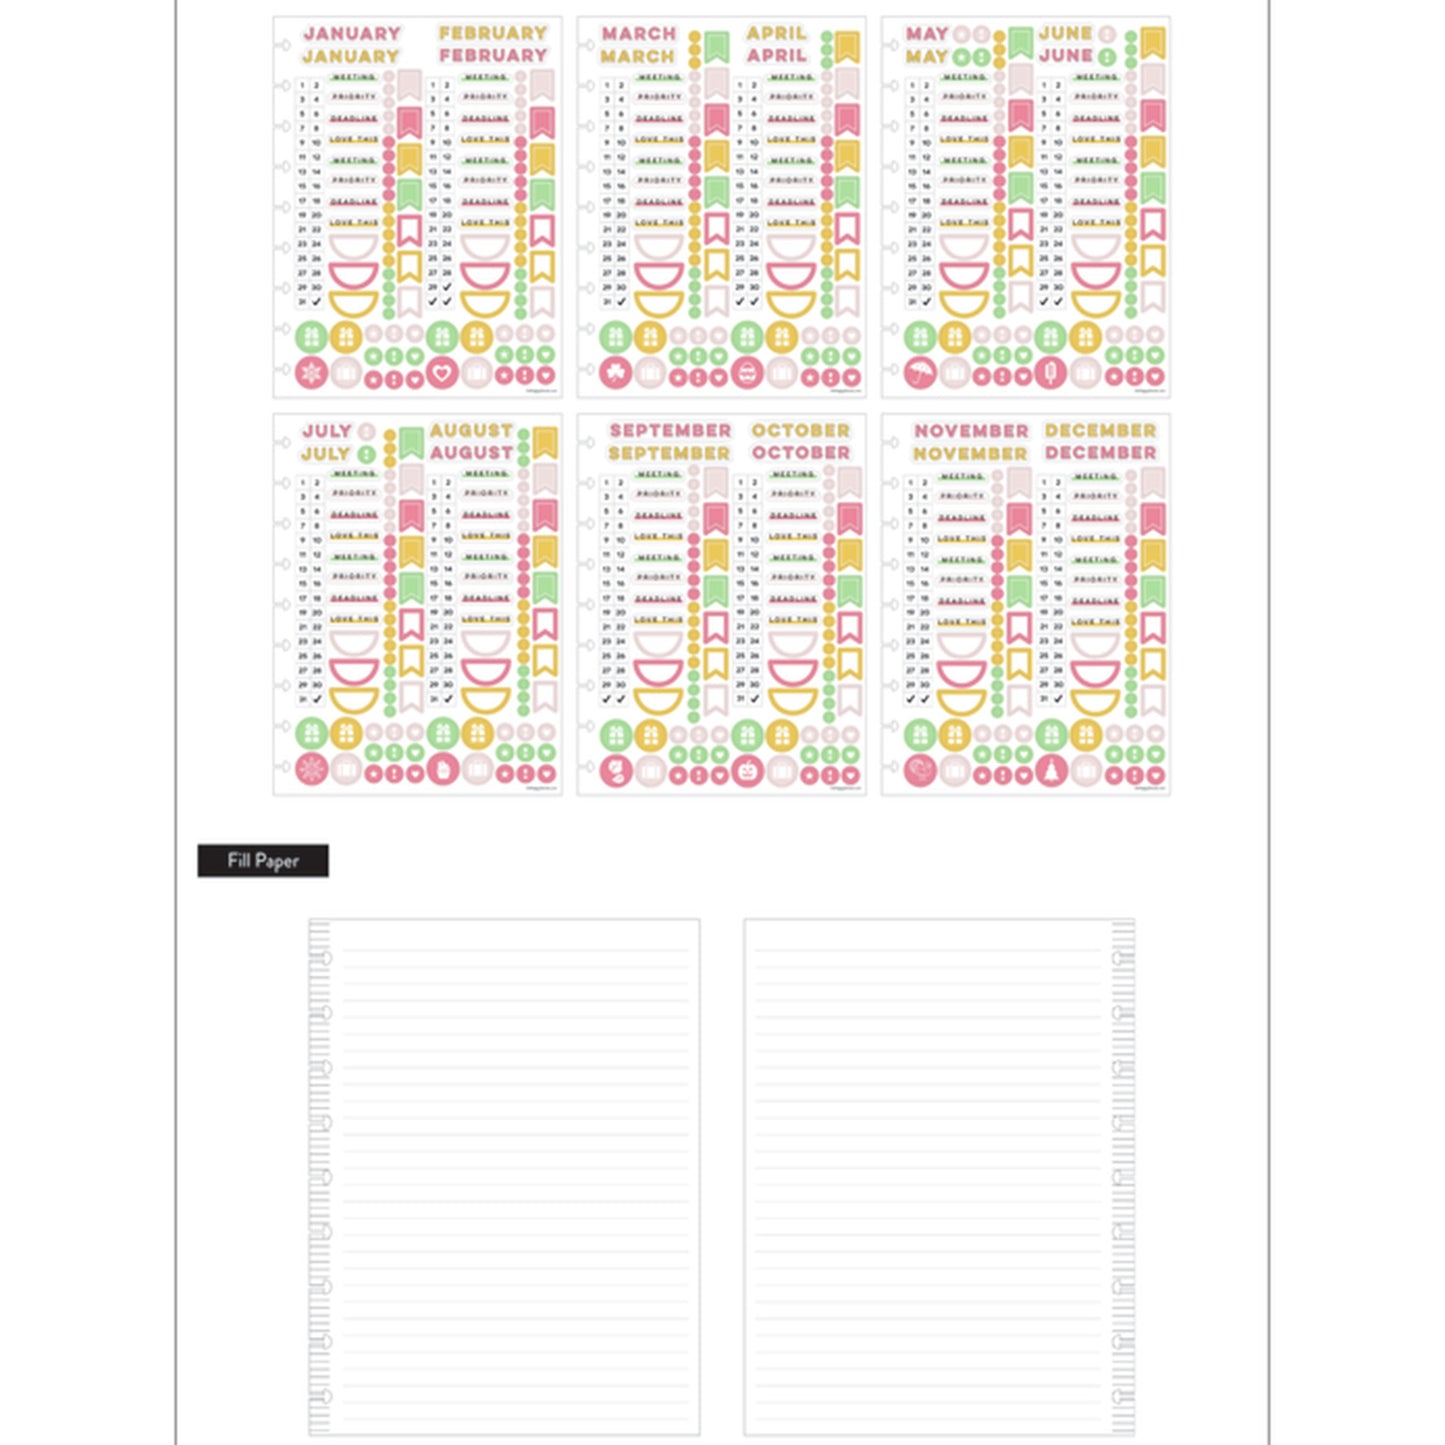 Happy Planner - Monthly Plans & Notes Classic Lineas - Watercolor Florals